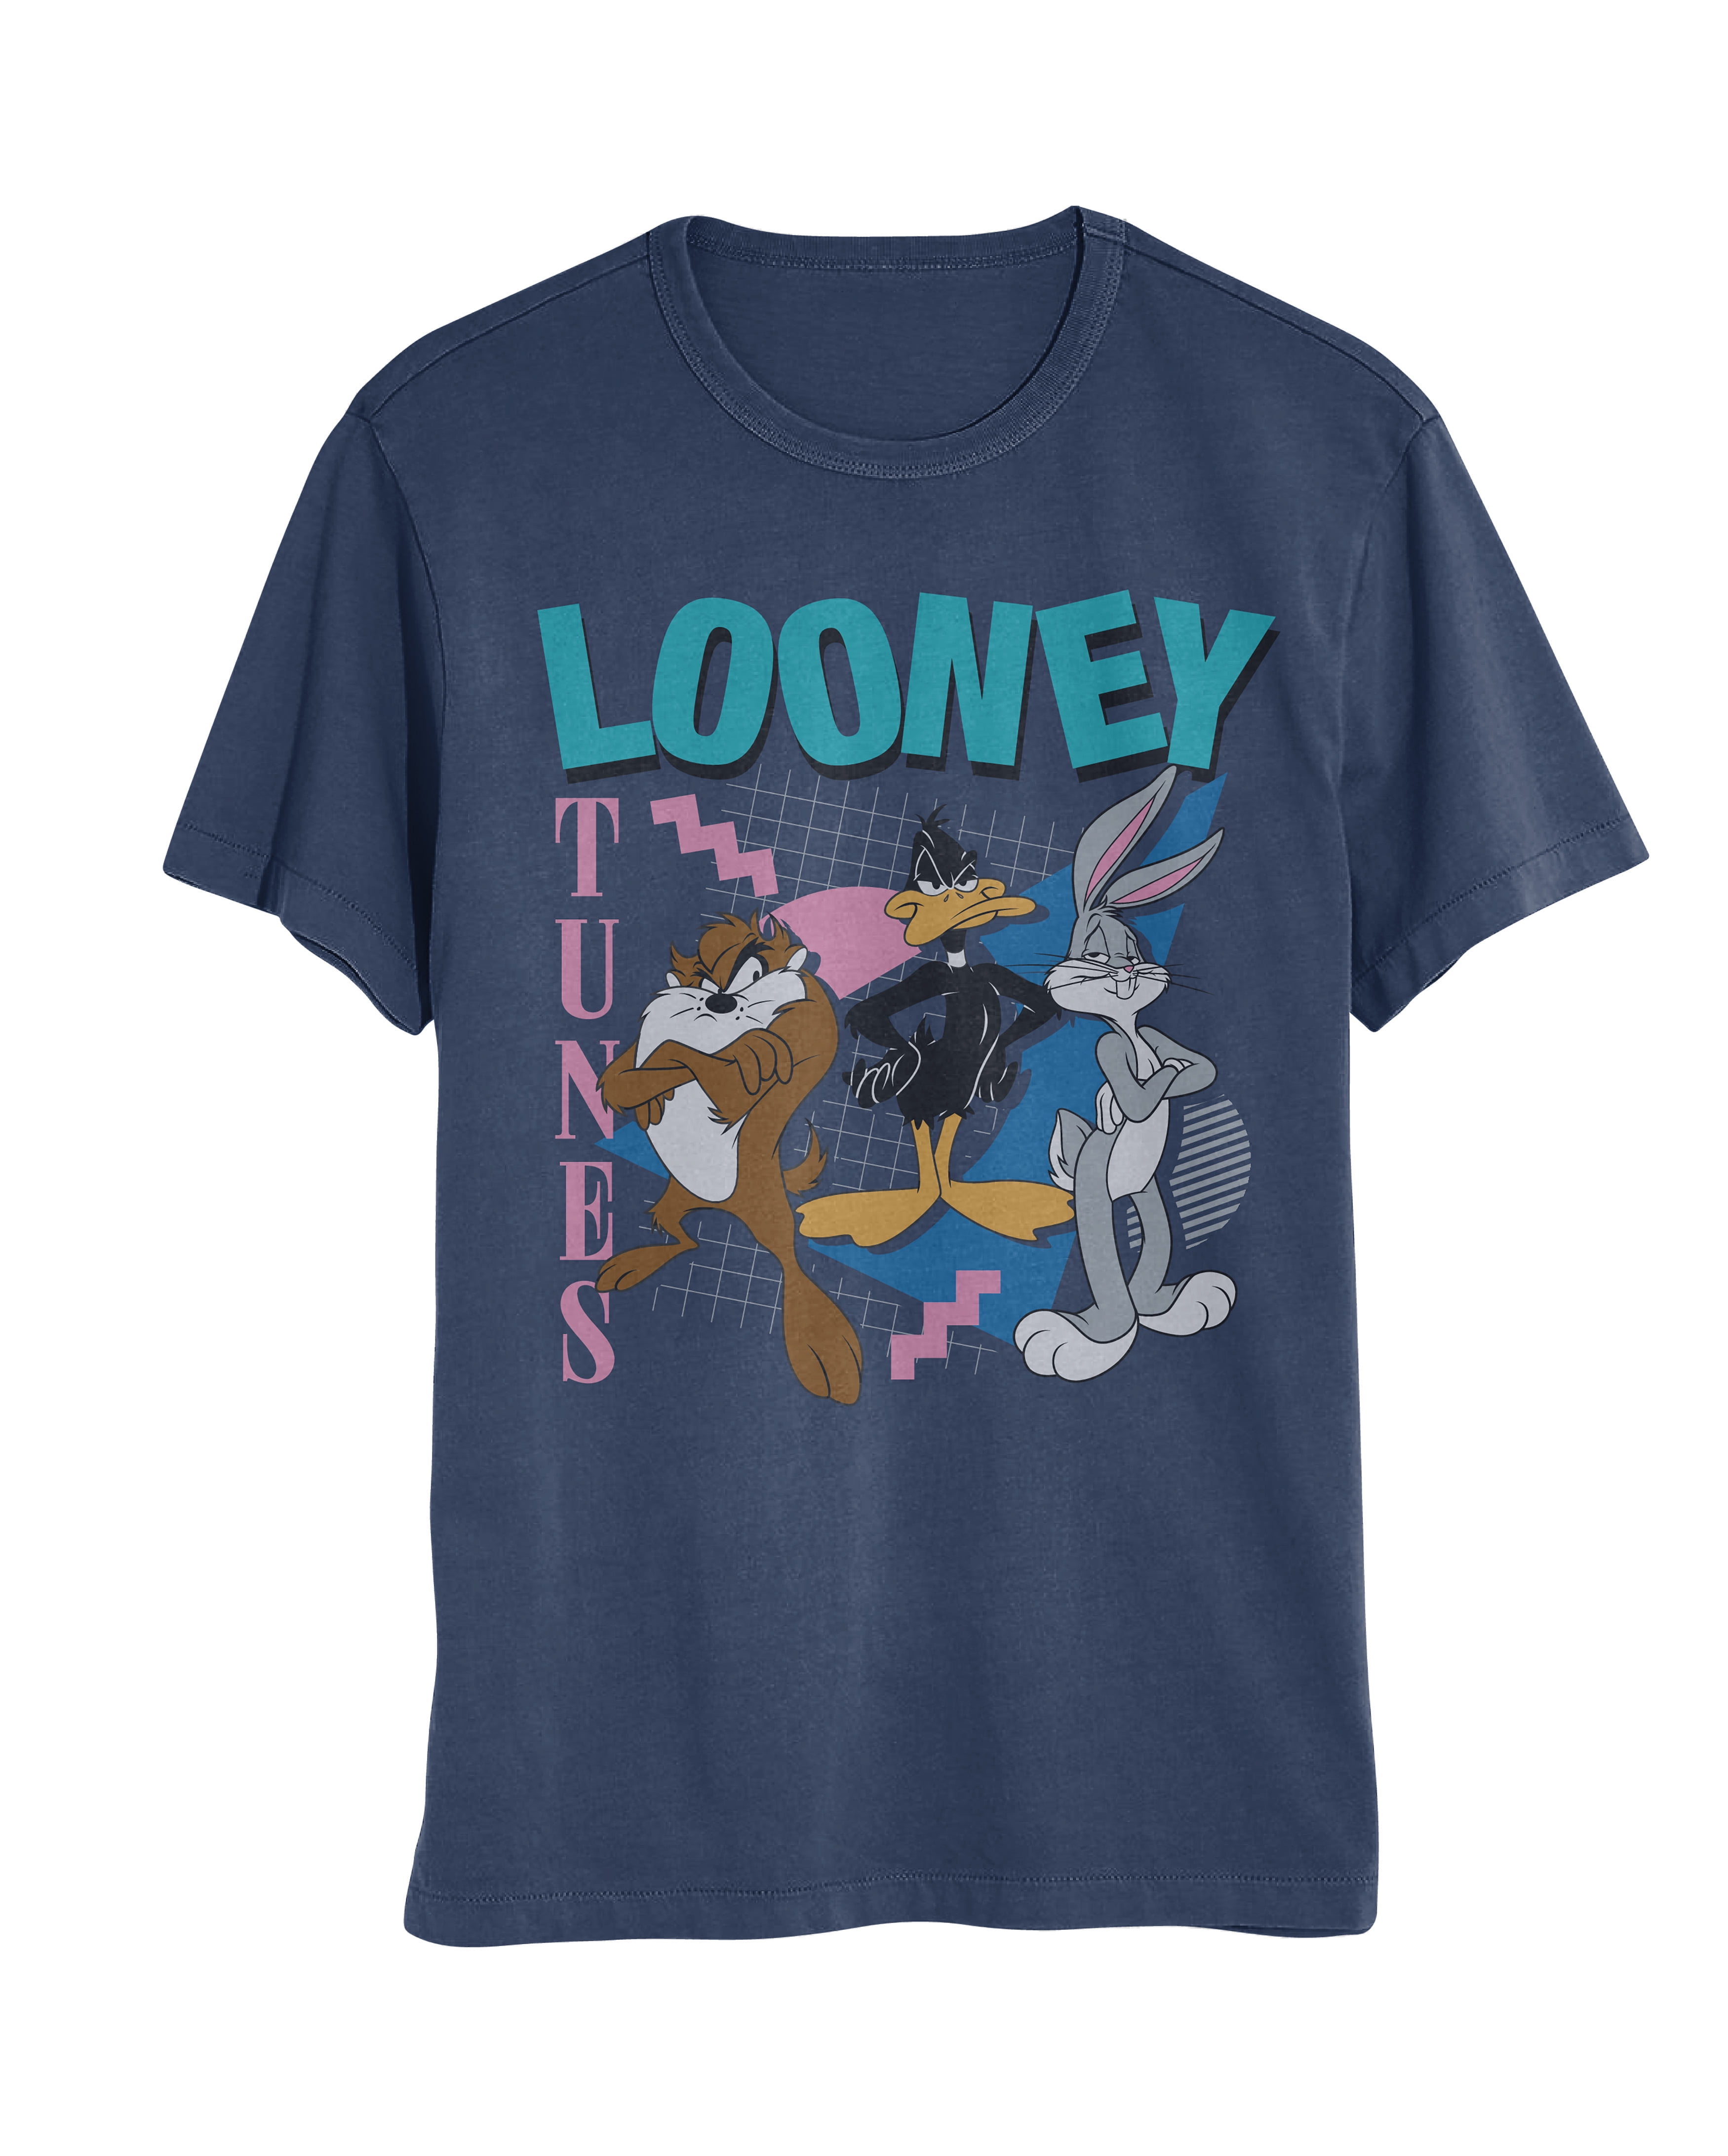 Looney Tunes Taz, Bunny Short S-XXL) T-Shirt Mens Womens and and Sleeve (White, Bugs Daffy